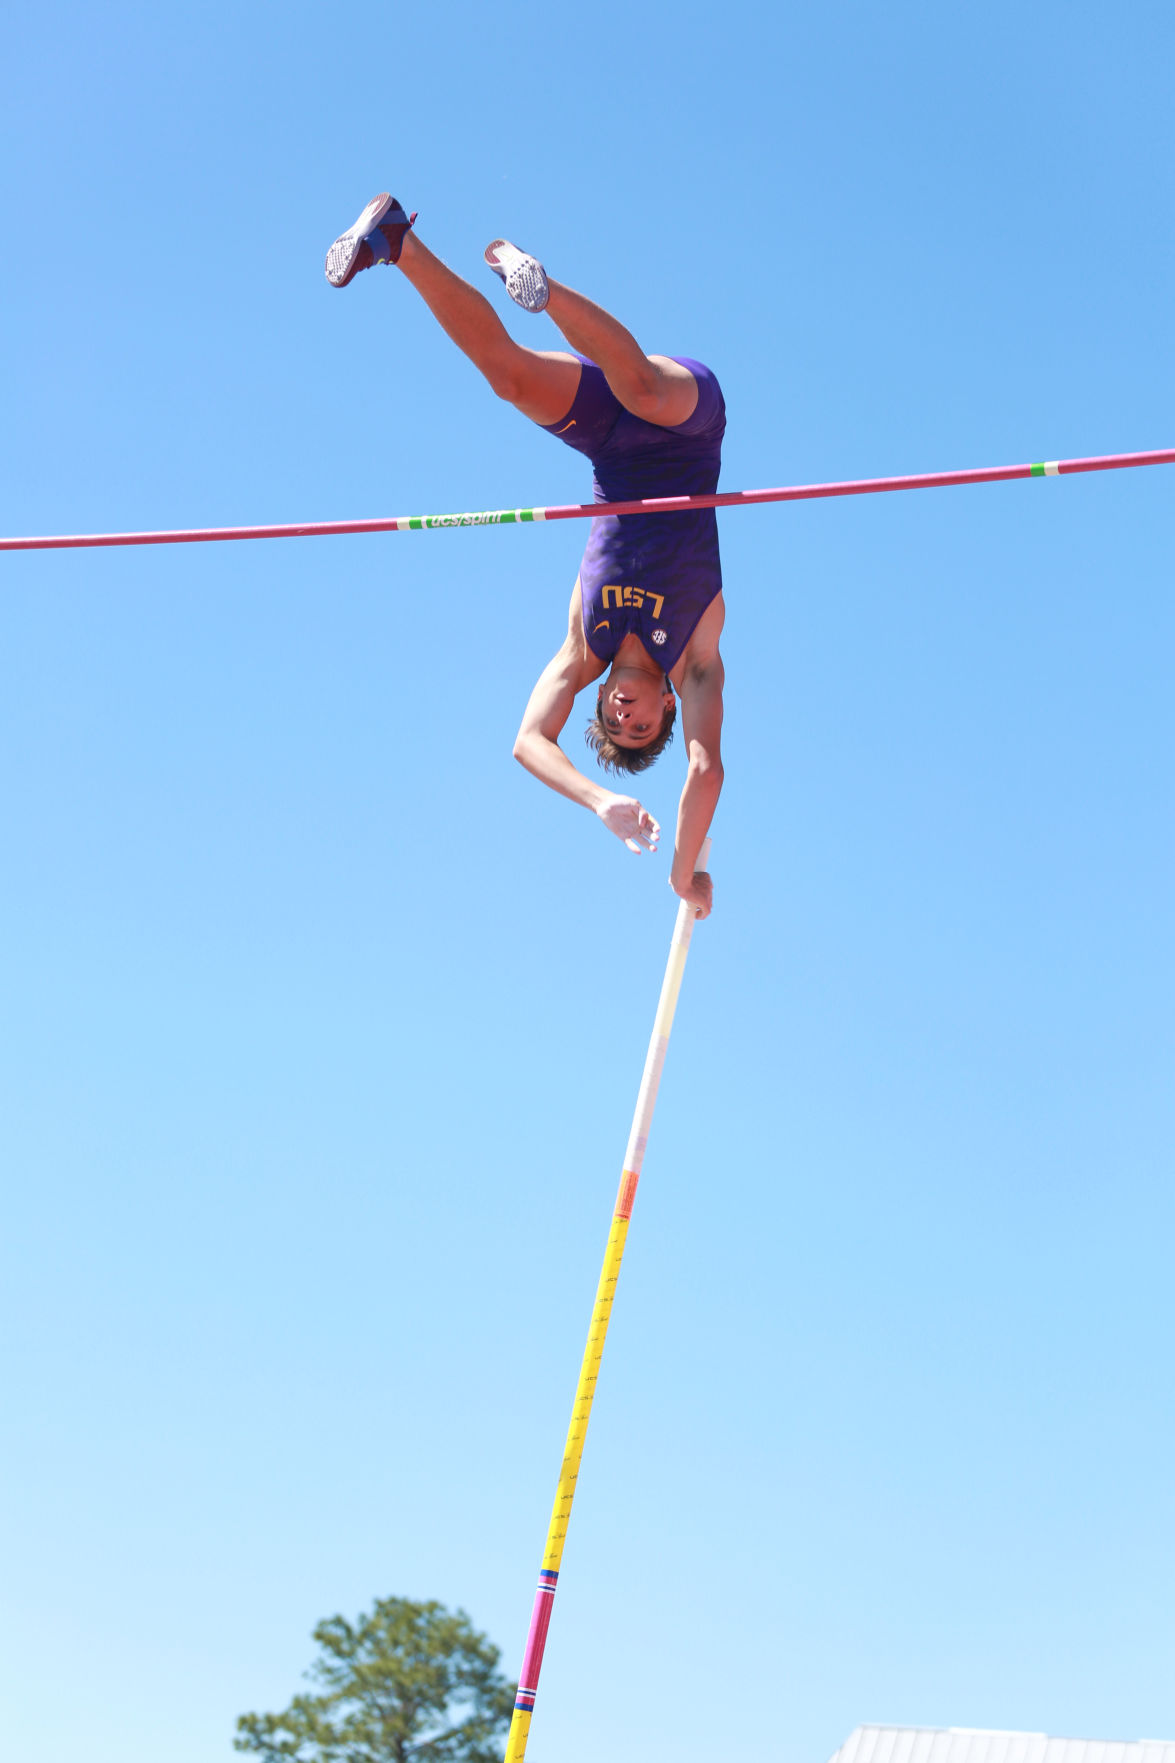 One more box to check: LSU's Mondo Duplantis going for pole vault grand slam at NCAA meet | LSU ...